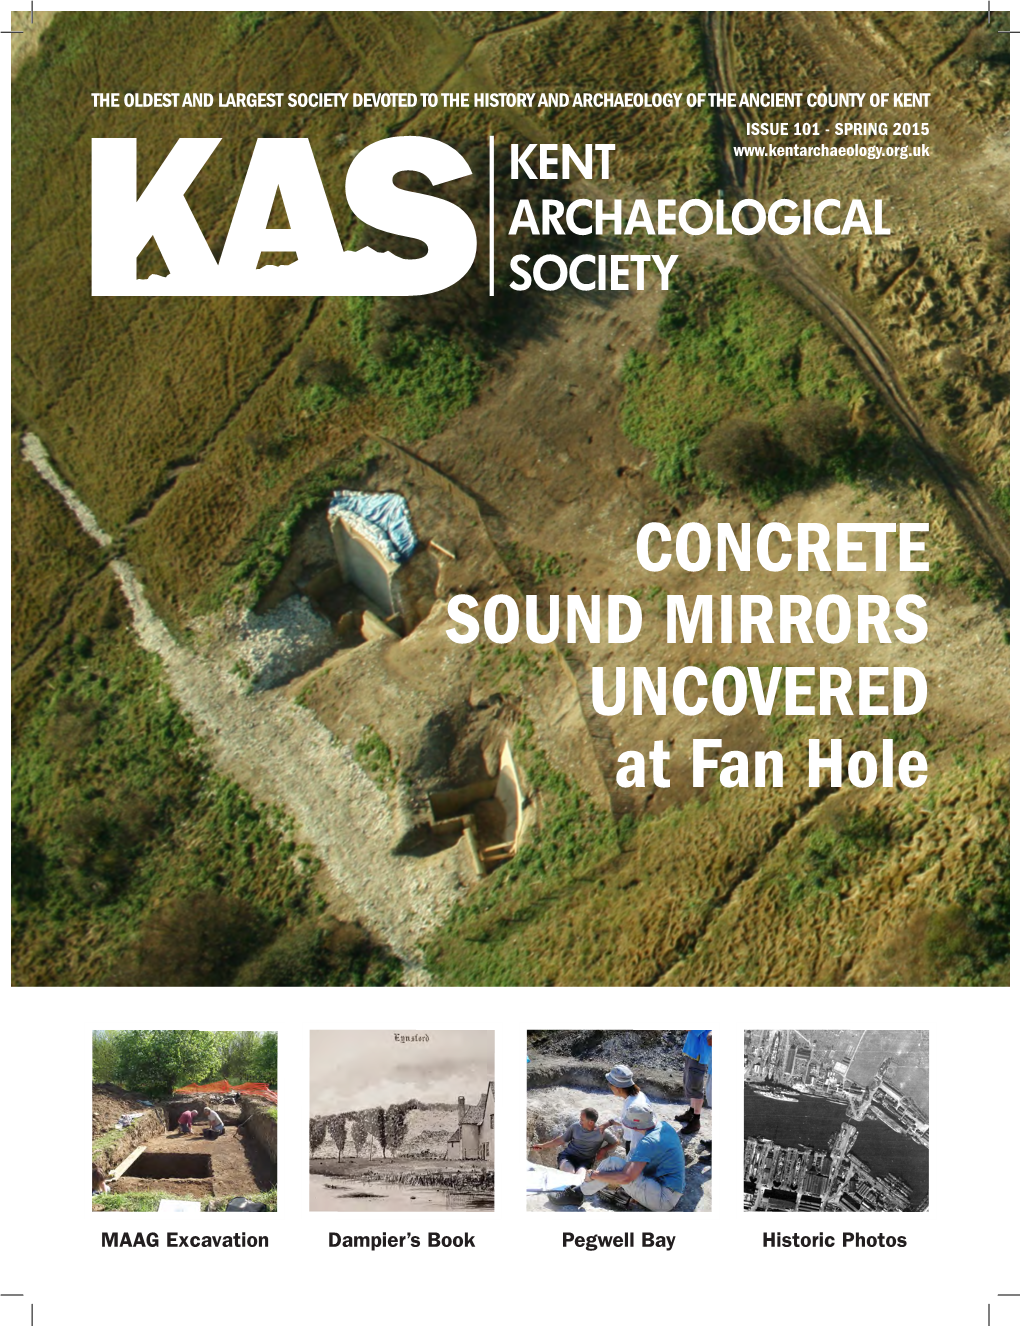 CONCRETE SOUND MIRRORS UNCOVERED at Fan Hole